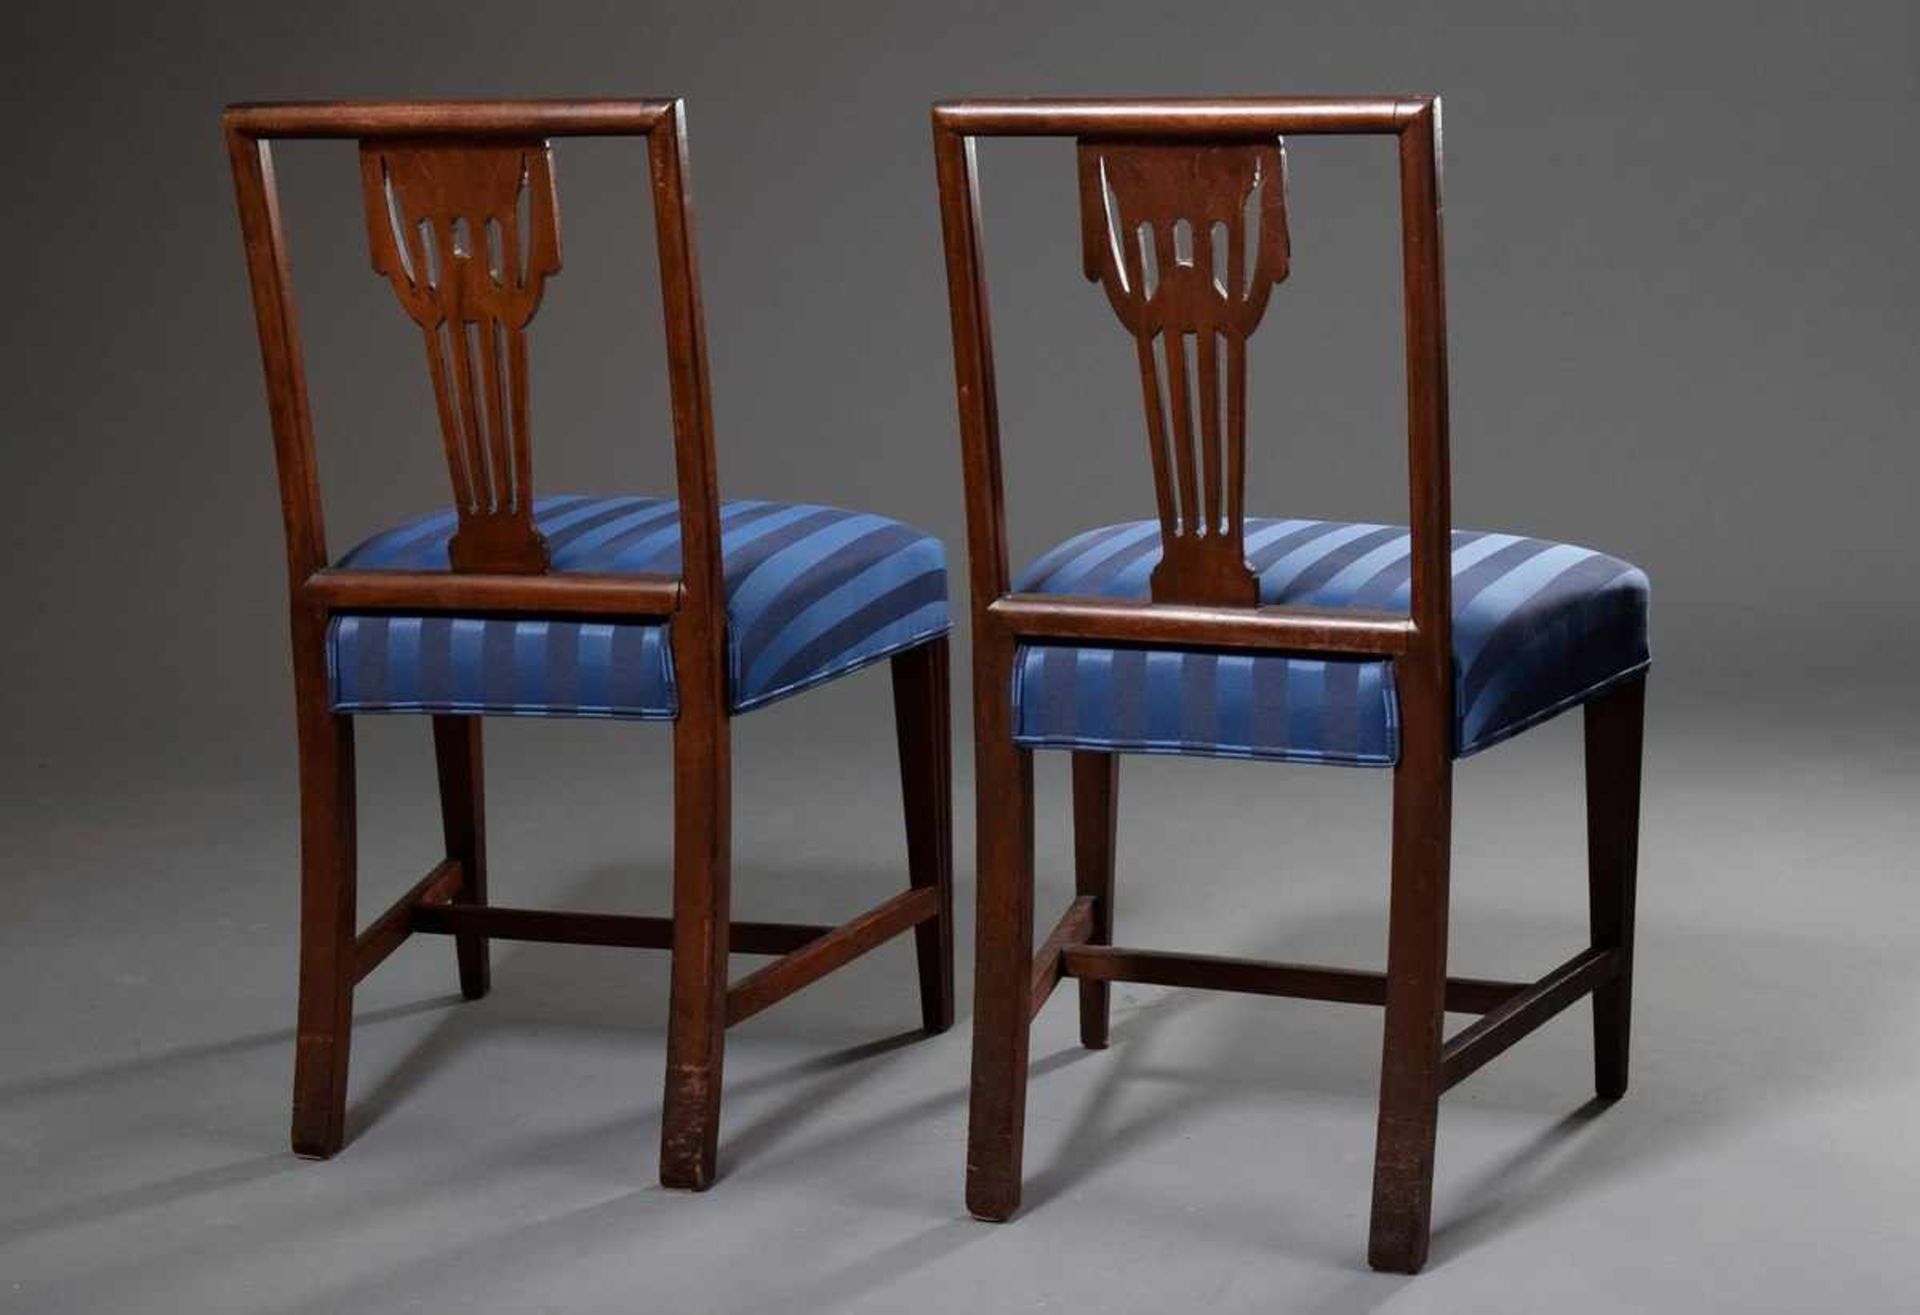 Pair of classicist chairs with "vase motif" in the backrest and blue cover, mahogany, h. 47/90cmPaar - Image 2 of 4